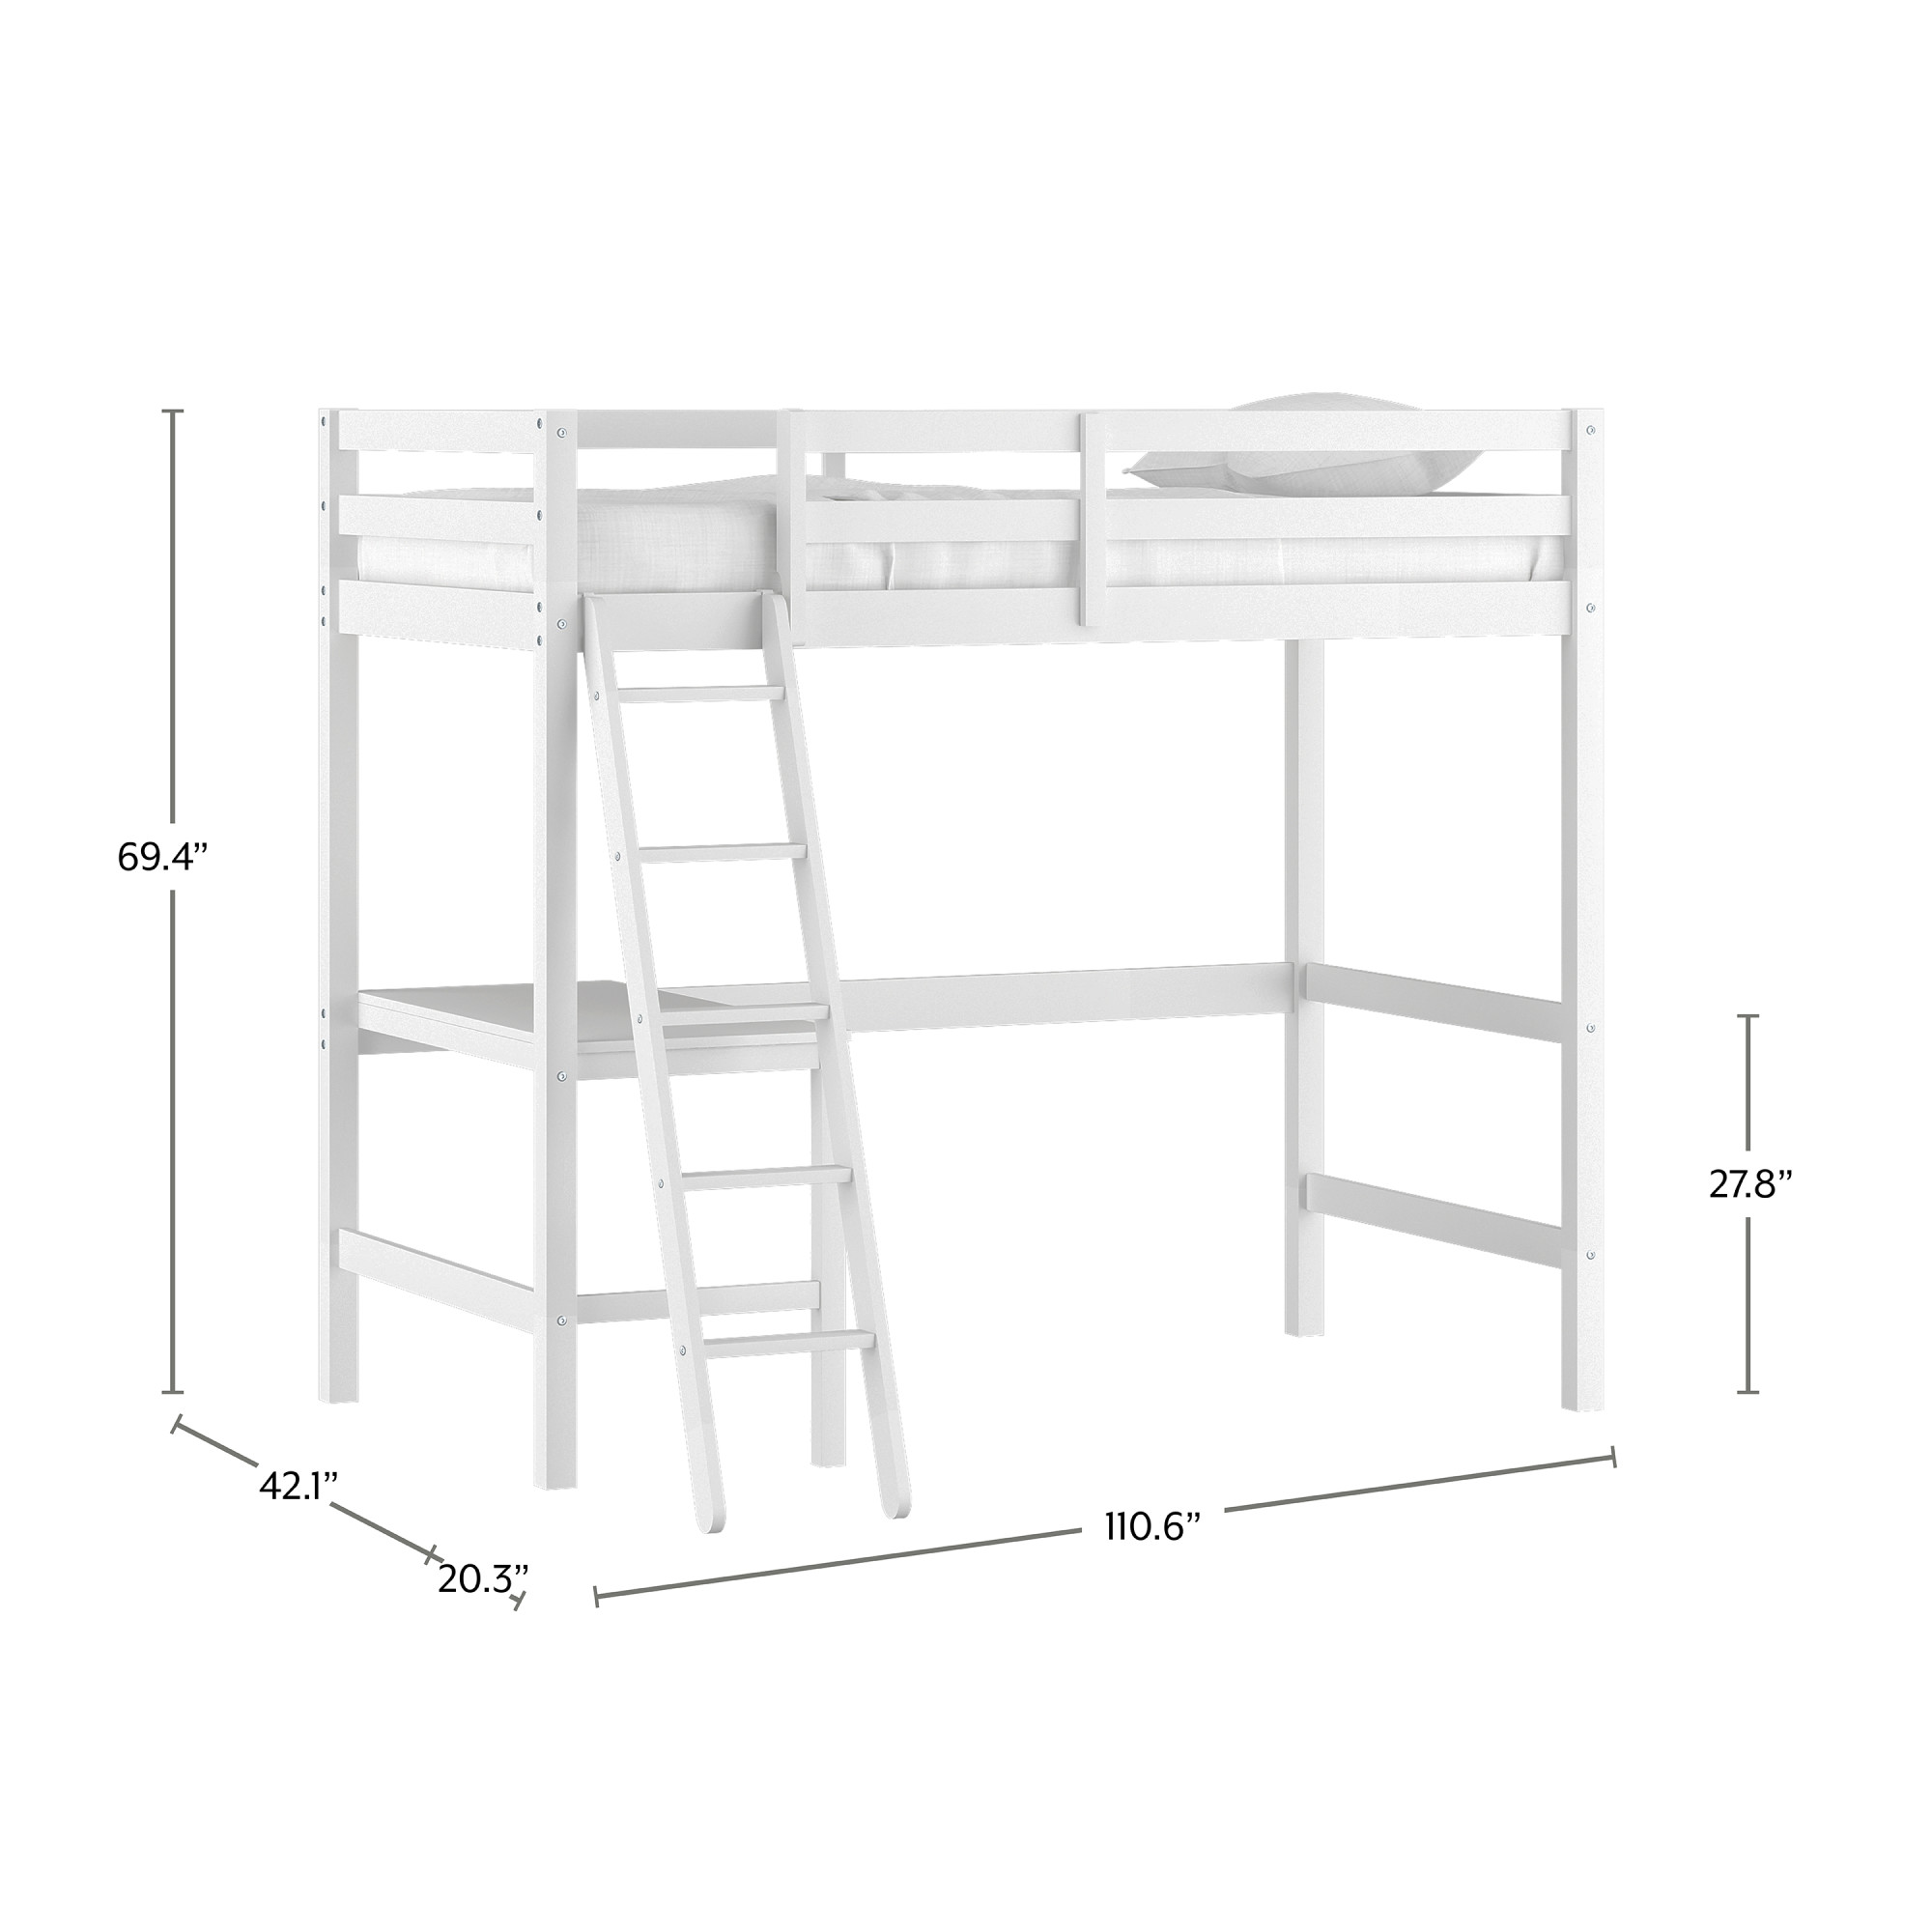 Hillsdale Campbell Wood Twin Loft Bunk Bed with Desk, White - image 5 of 14